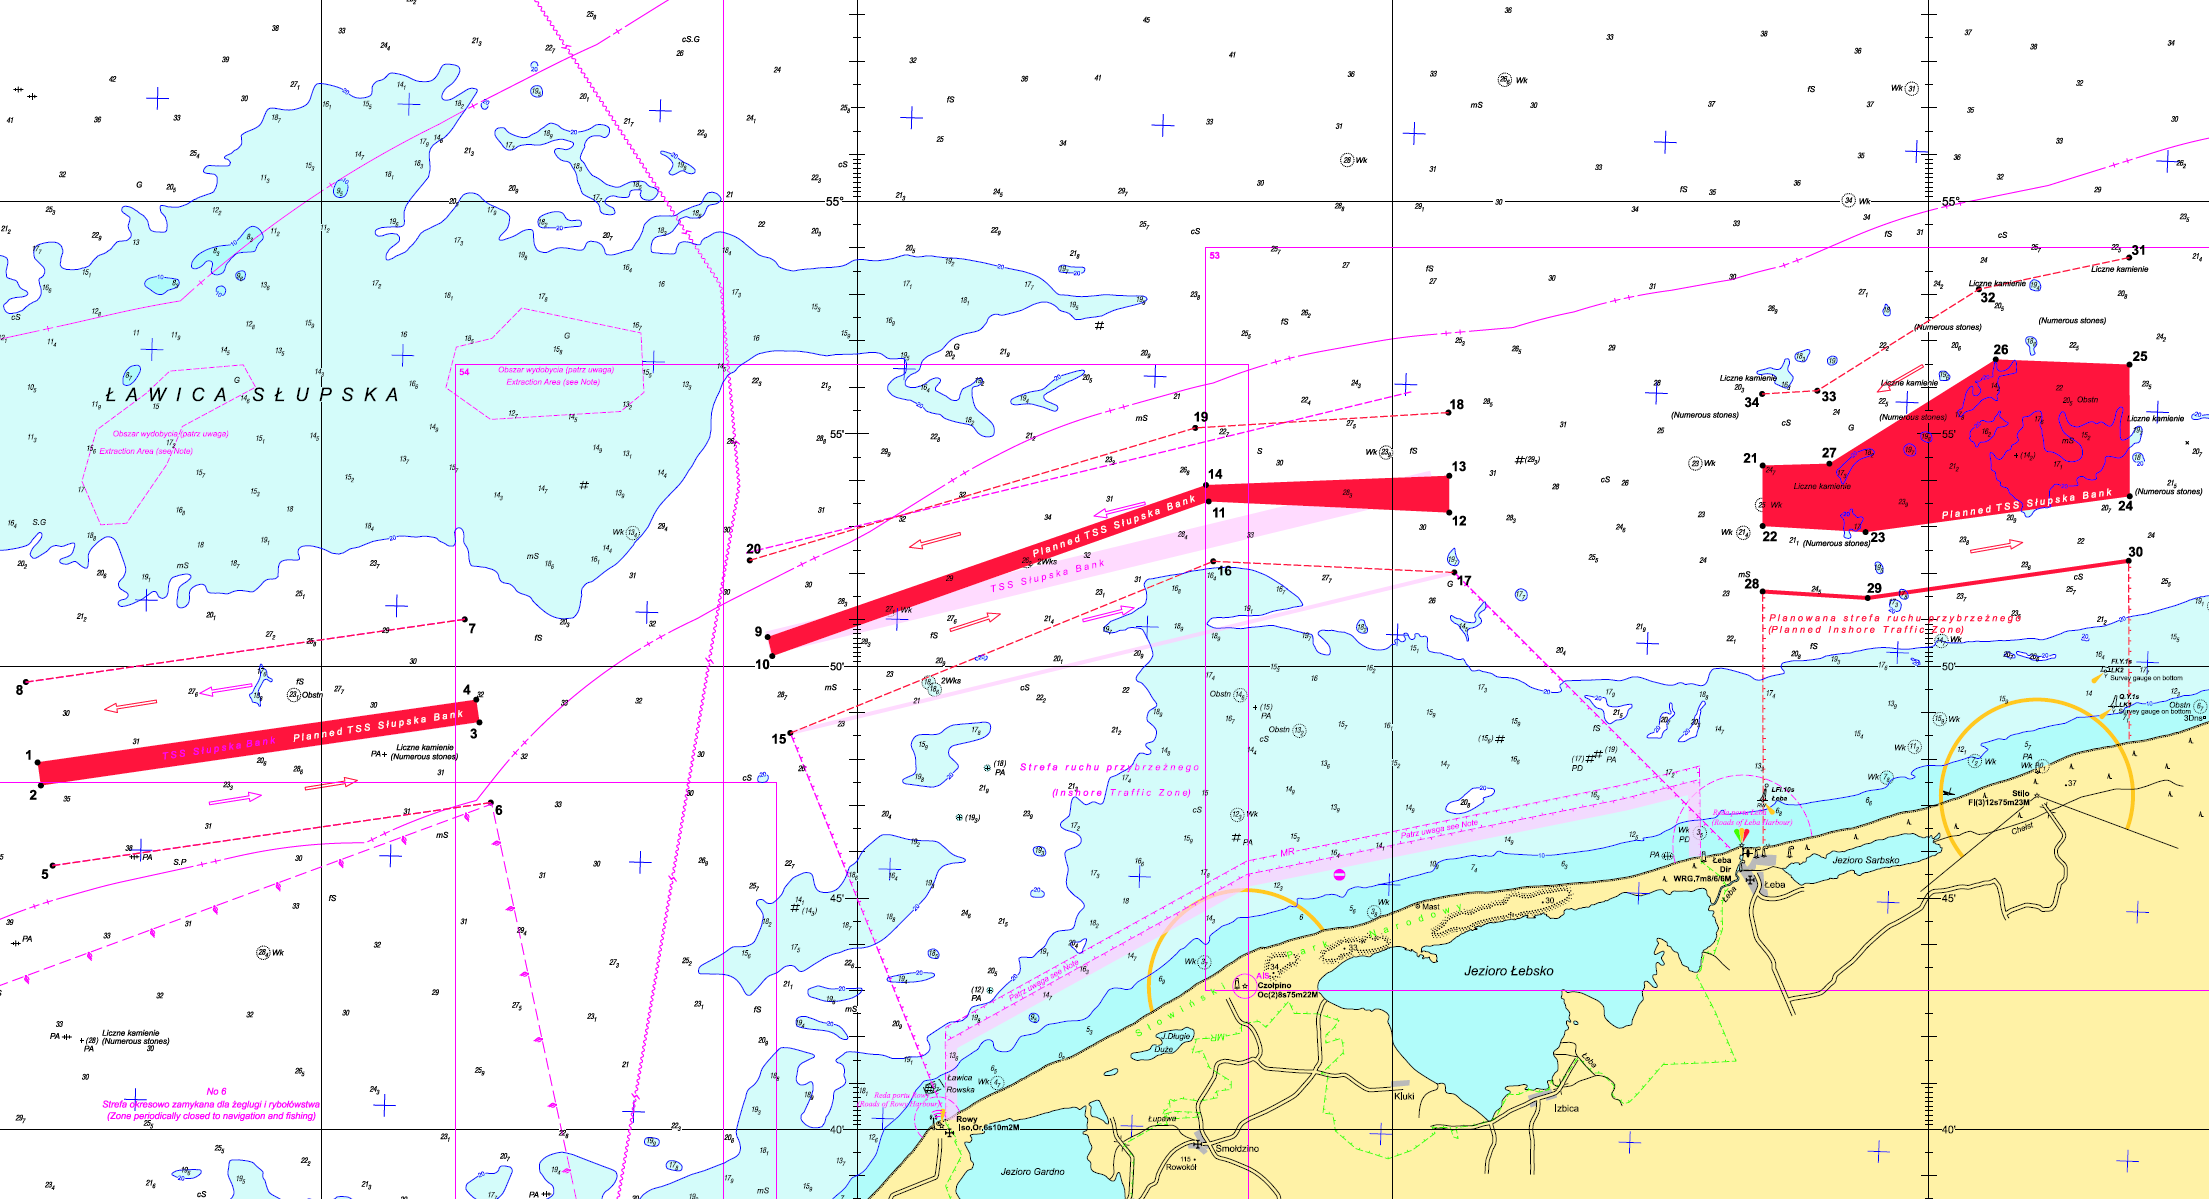 Against the background of the nautical map (with marked depths), the new traffic separation scheme was shown in red. In the central part of the TSS one can see a bright purple course of the previous traffic separation zone.